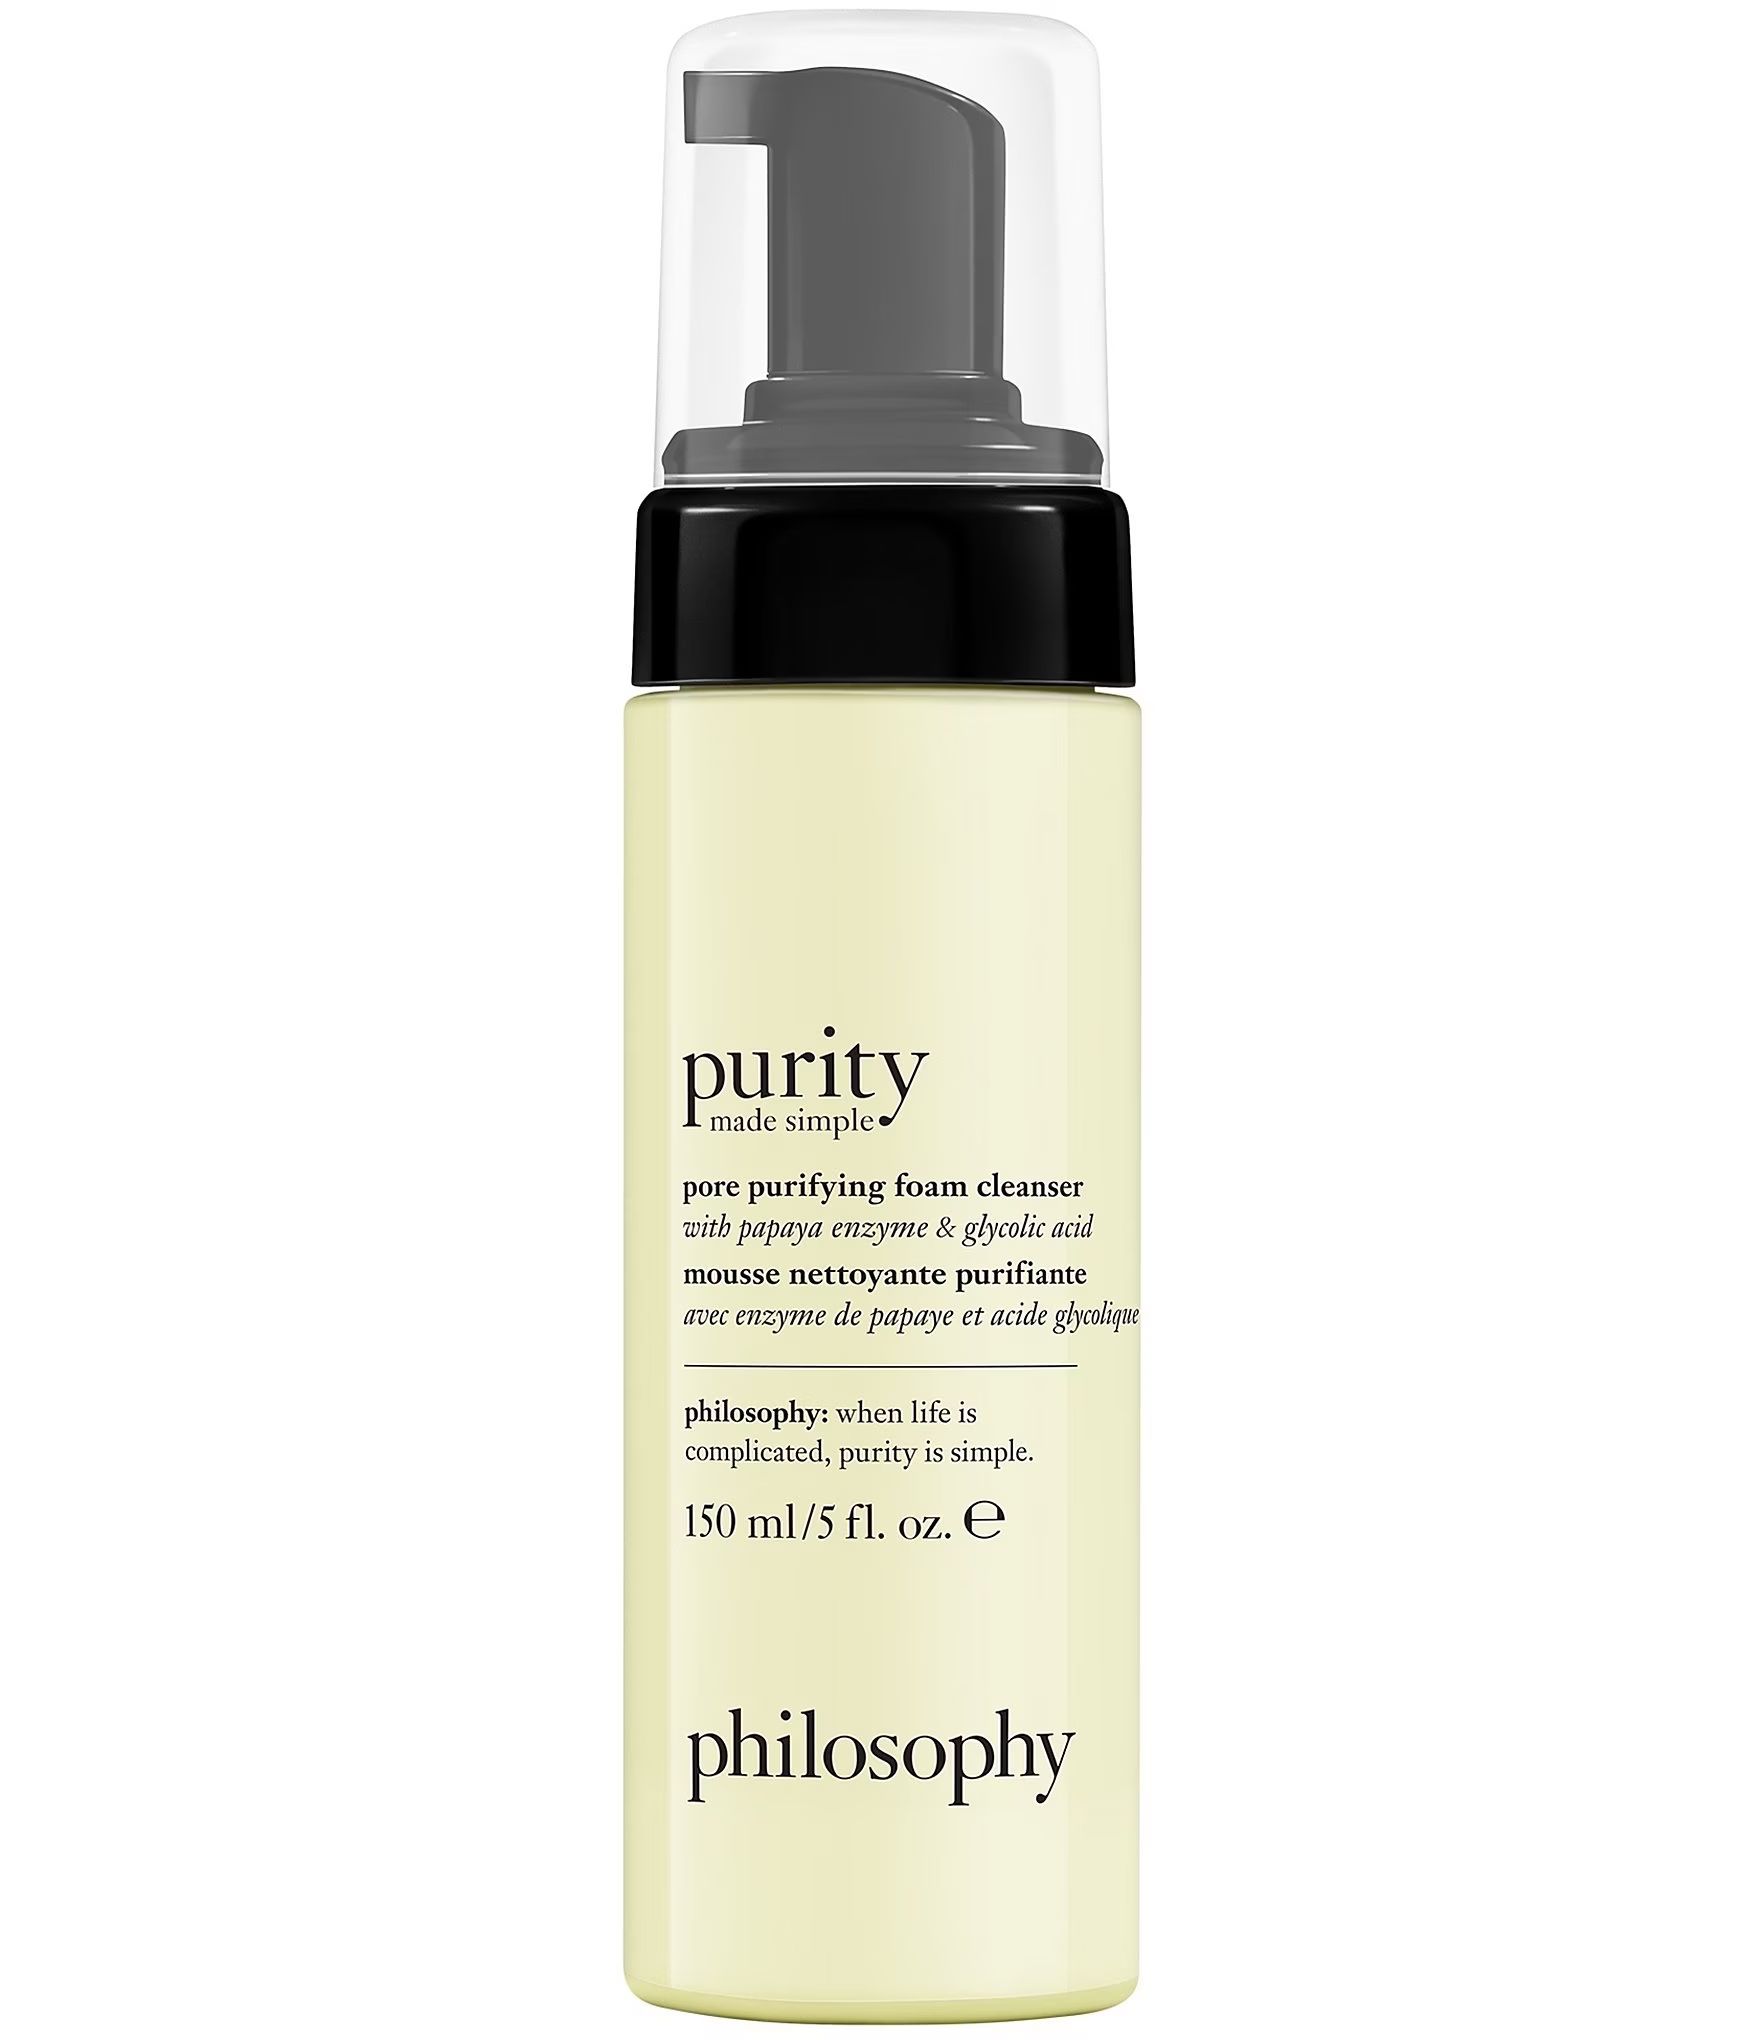 purity made simple pore purifying foam cleanser | Dillard's